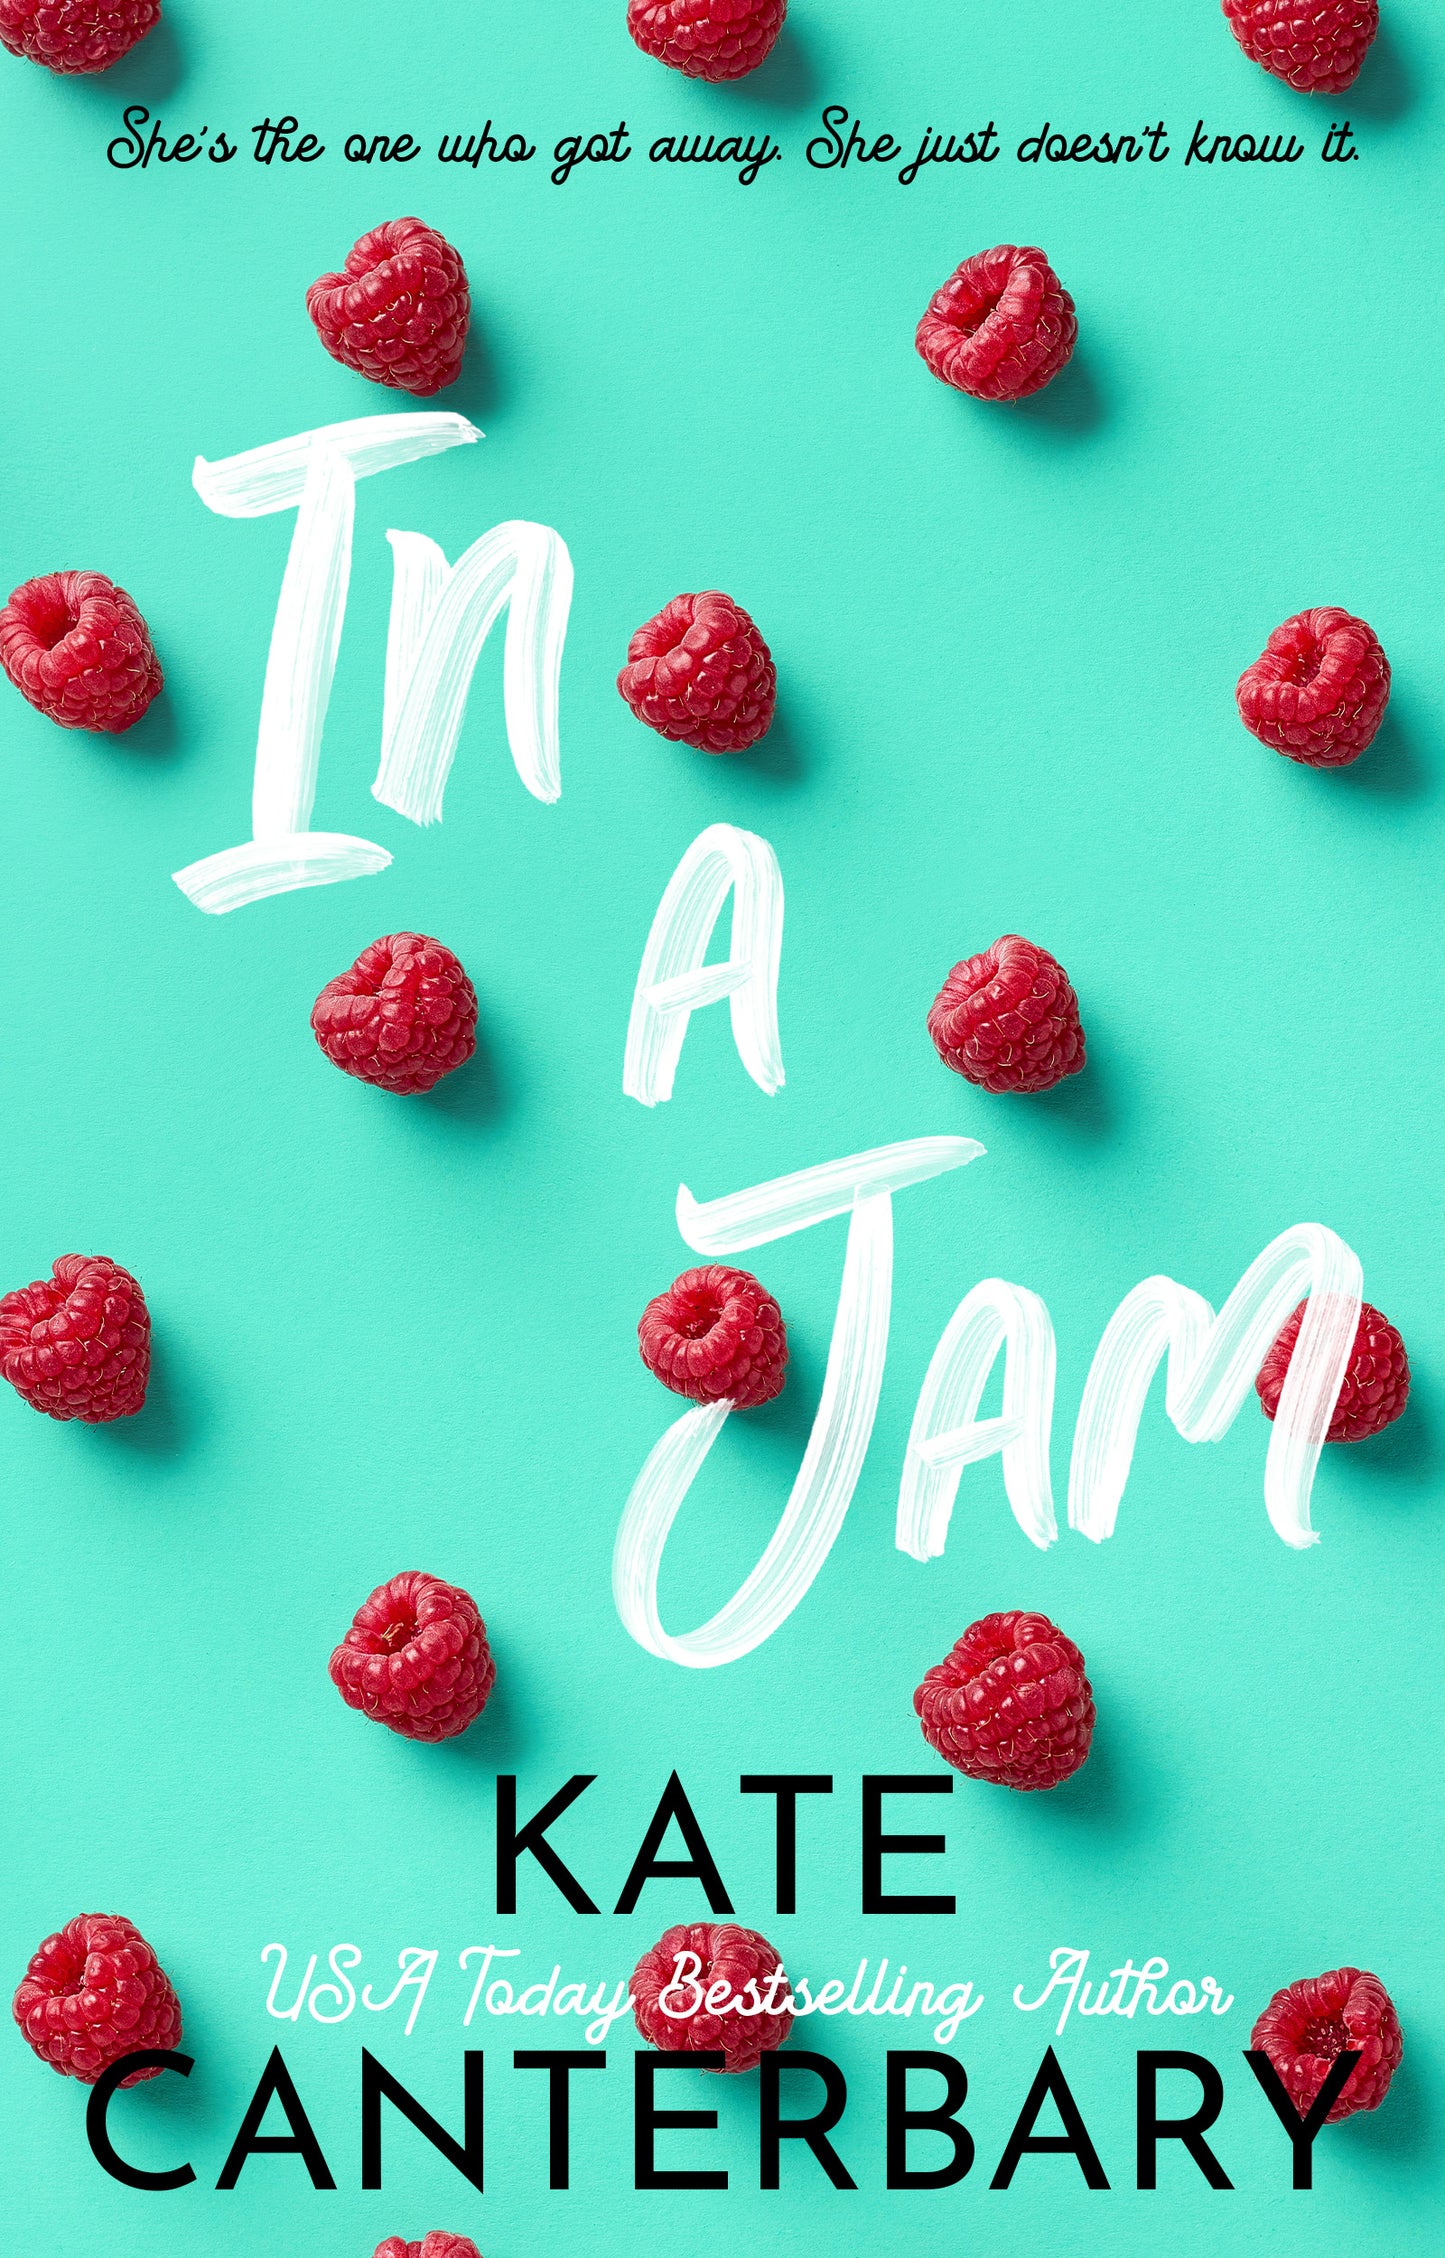 In a Jam - Kate Canterbary